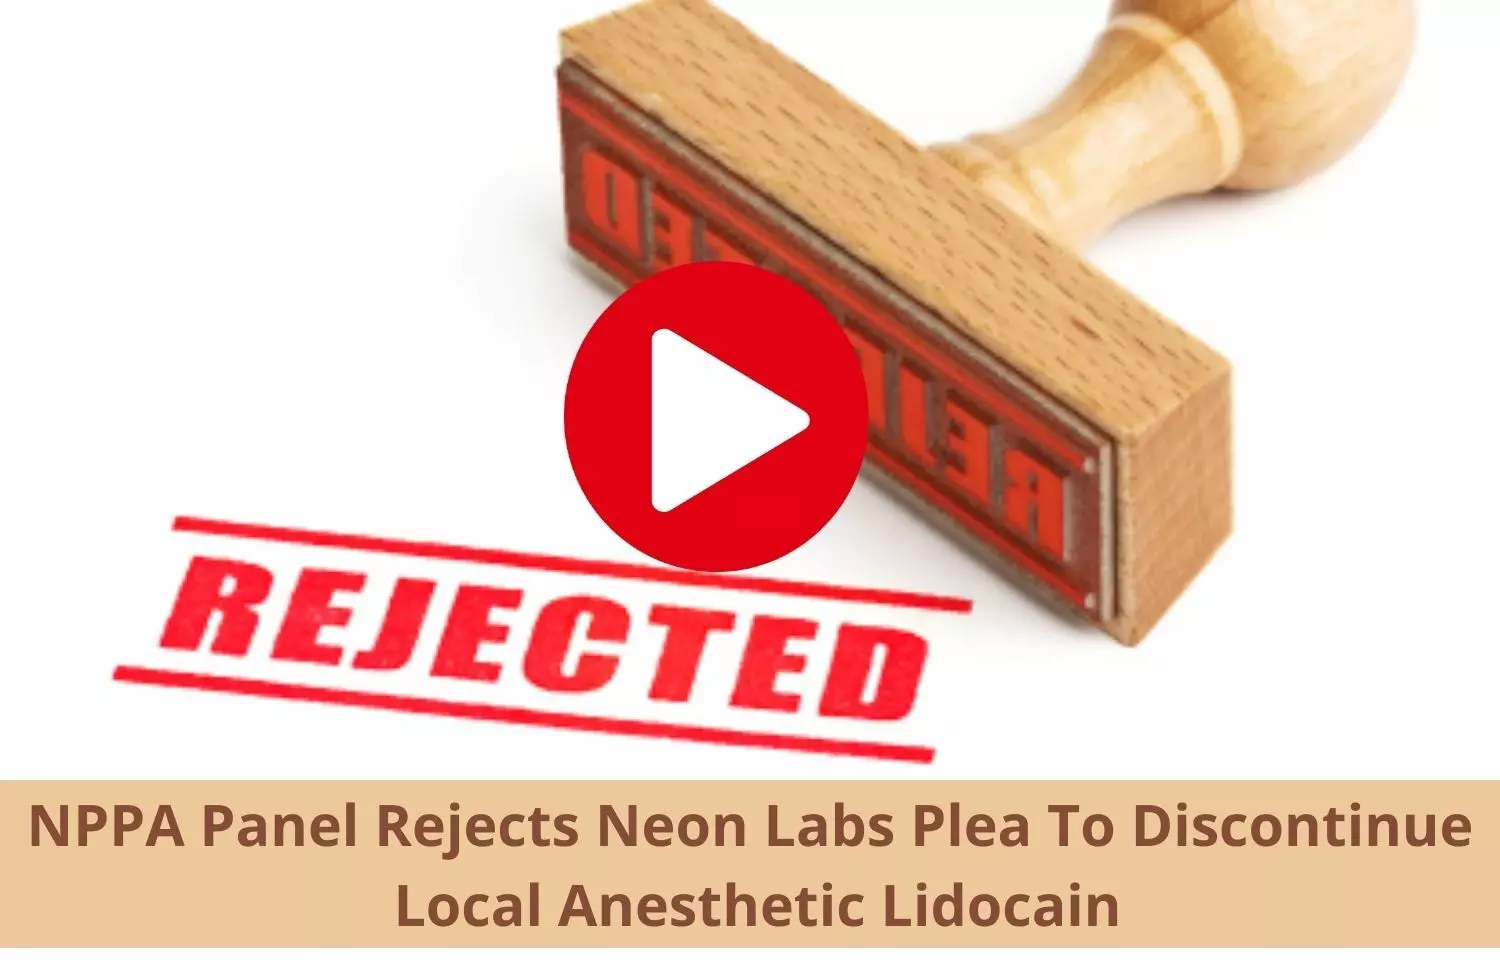 No relief to Neon labs to discontinuation of Local Anesthetic Lidocain